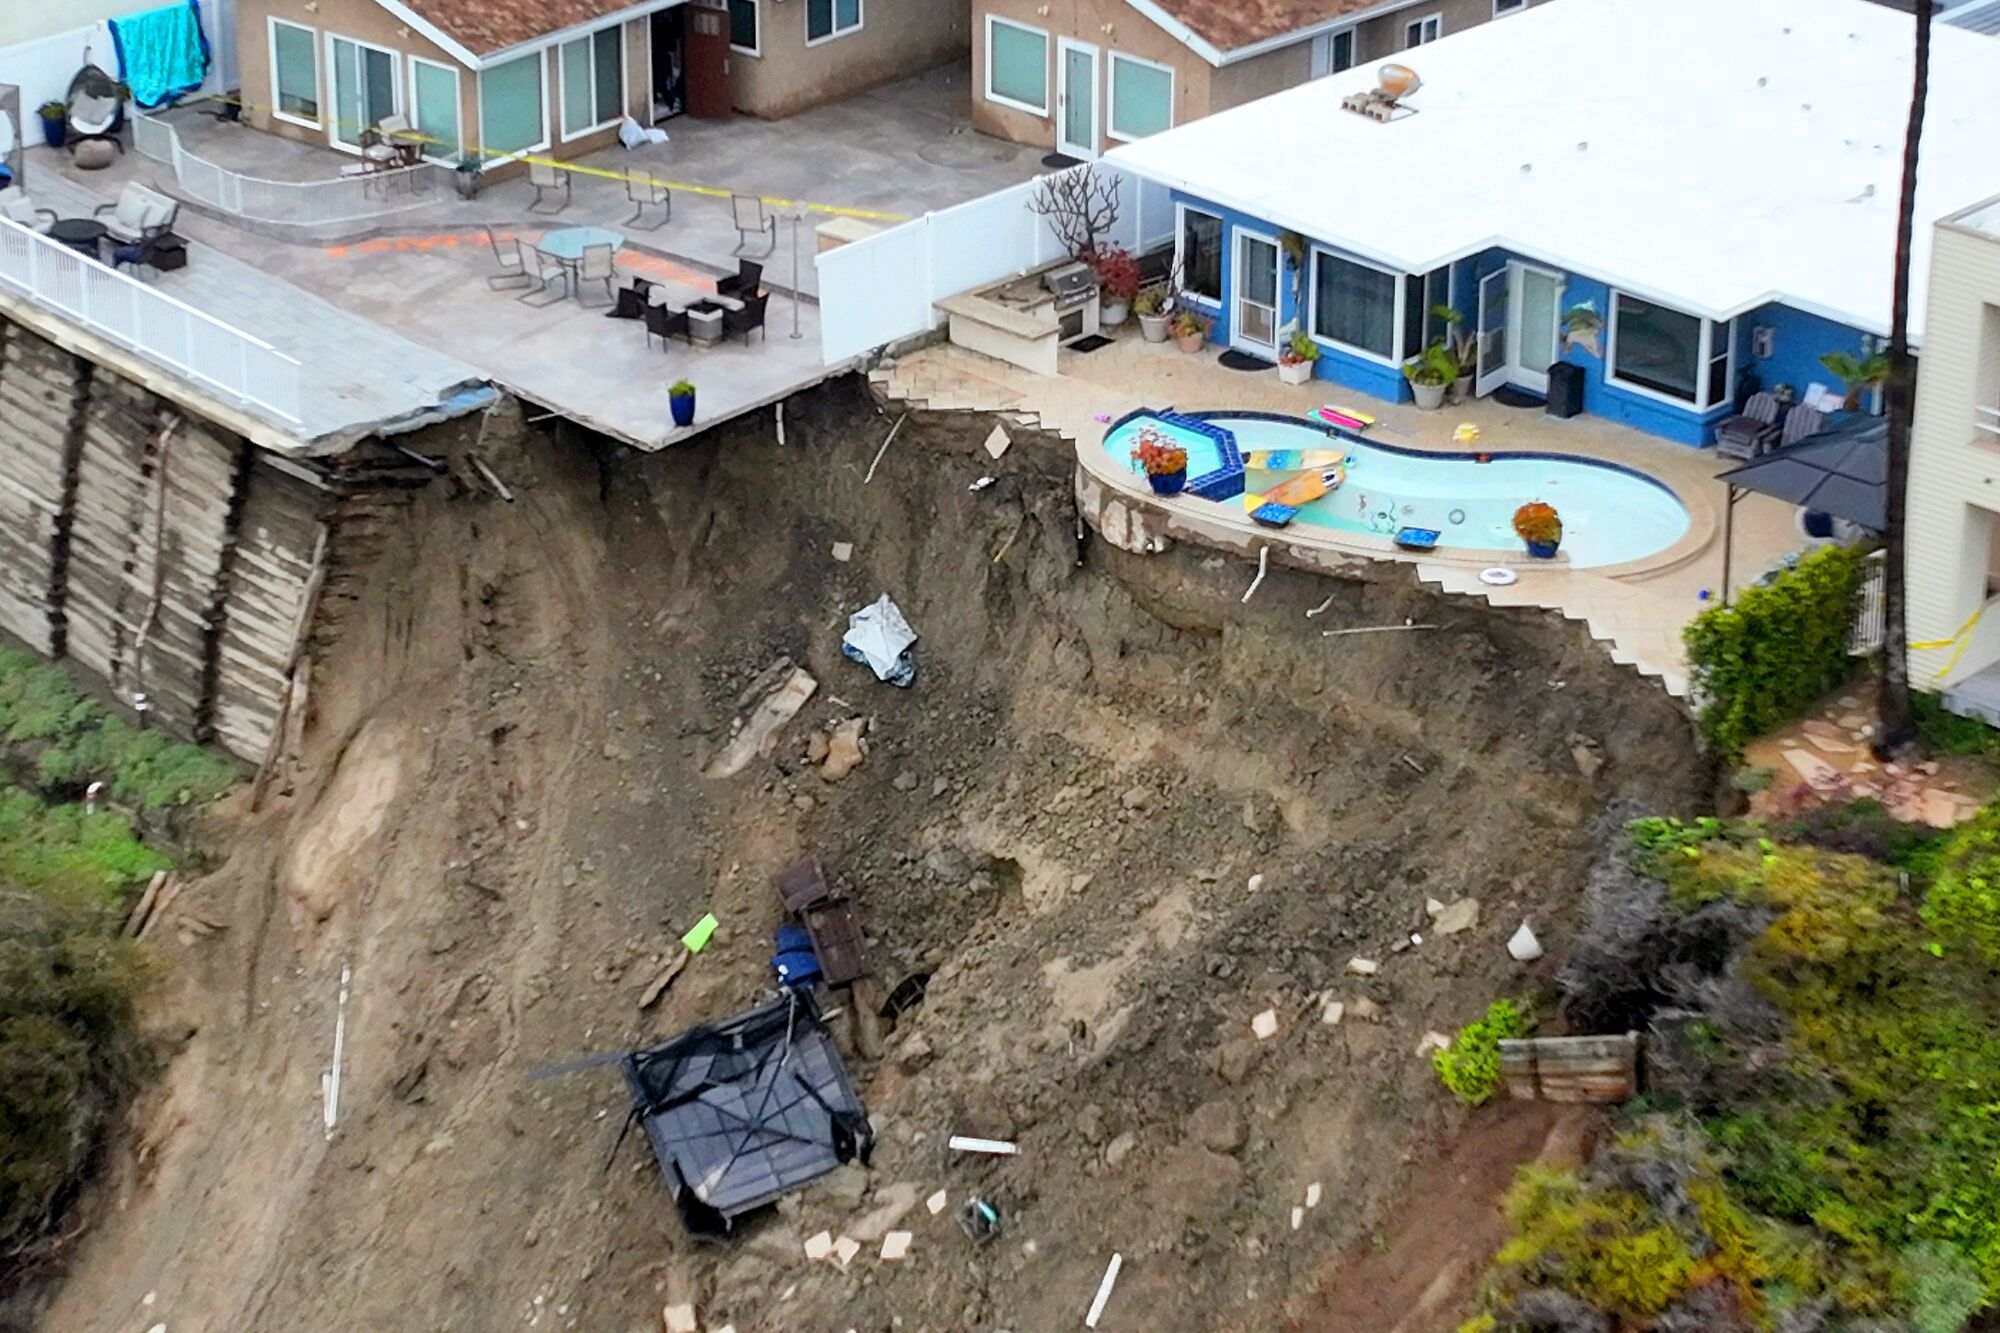 An aerial view of a backyard.